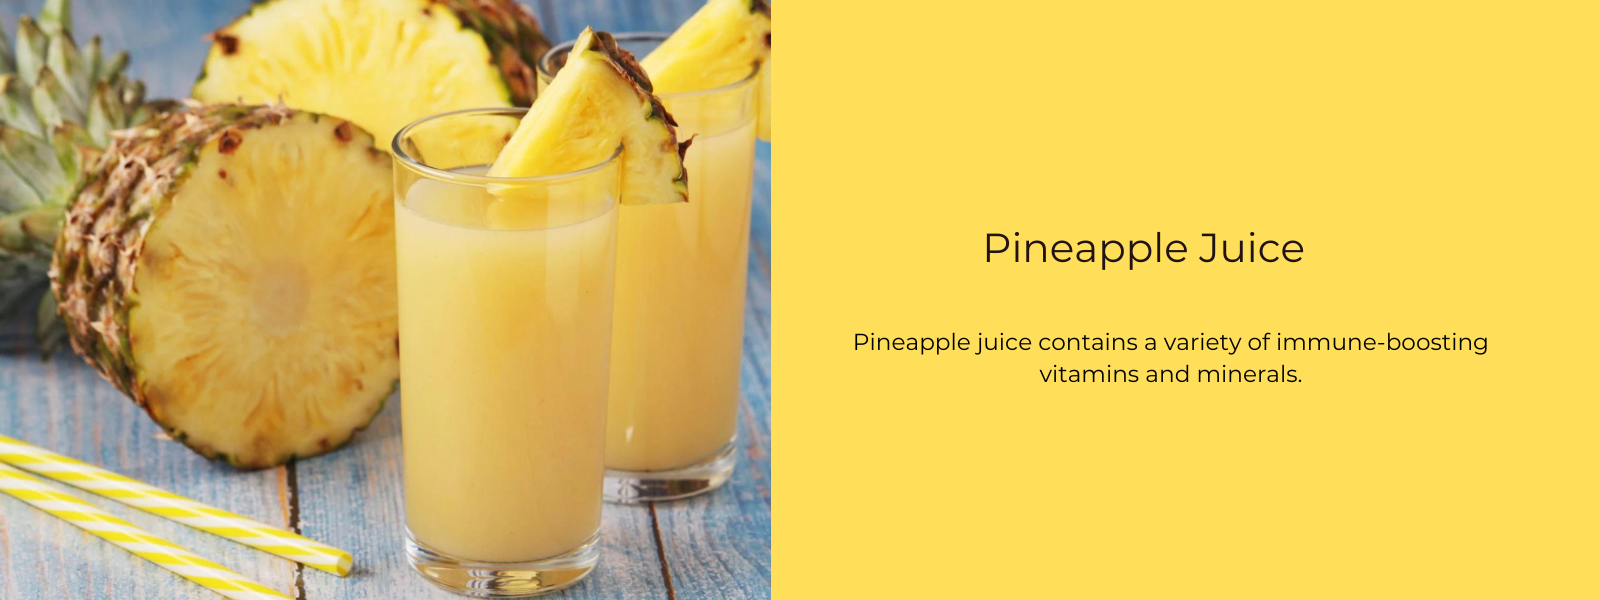 Pineapple Juice – Health Benefits, Uses and Important Facts